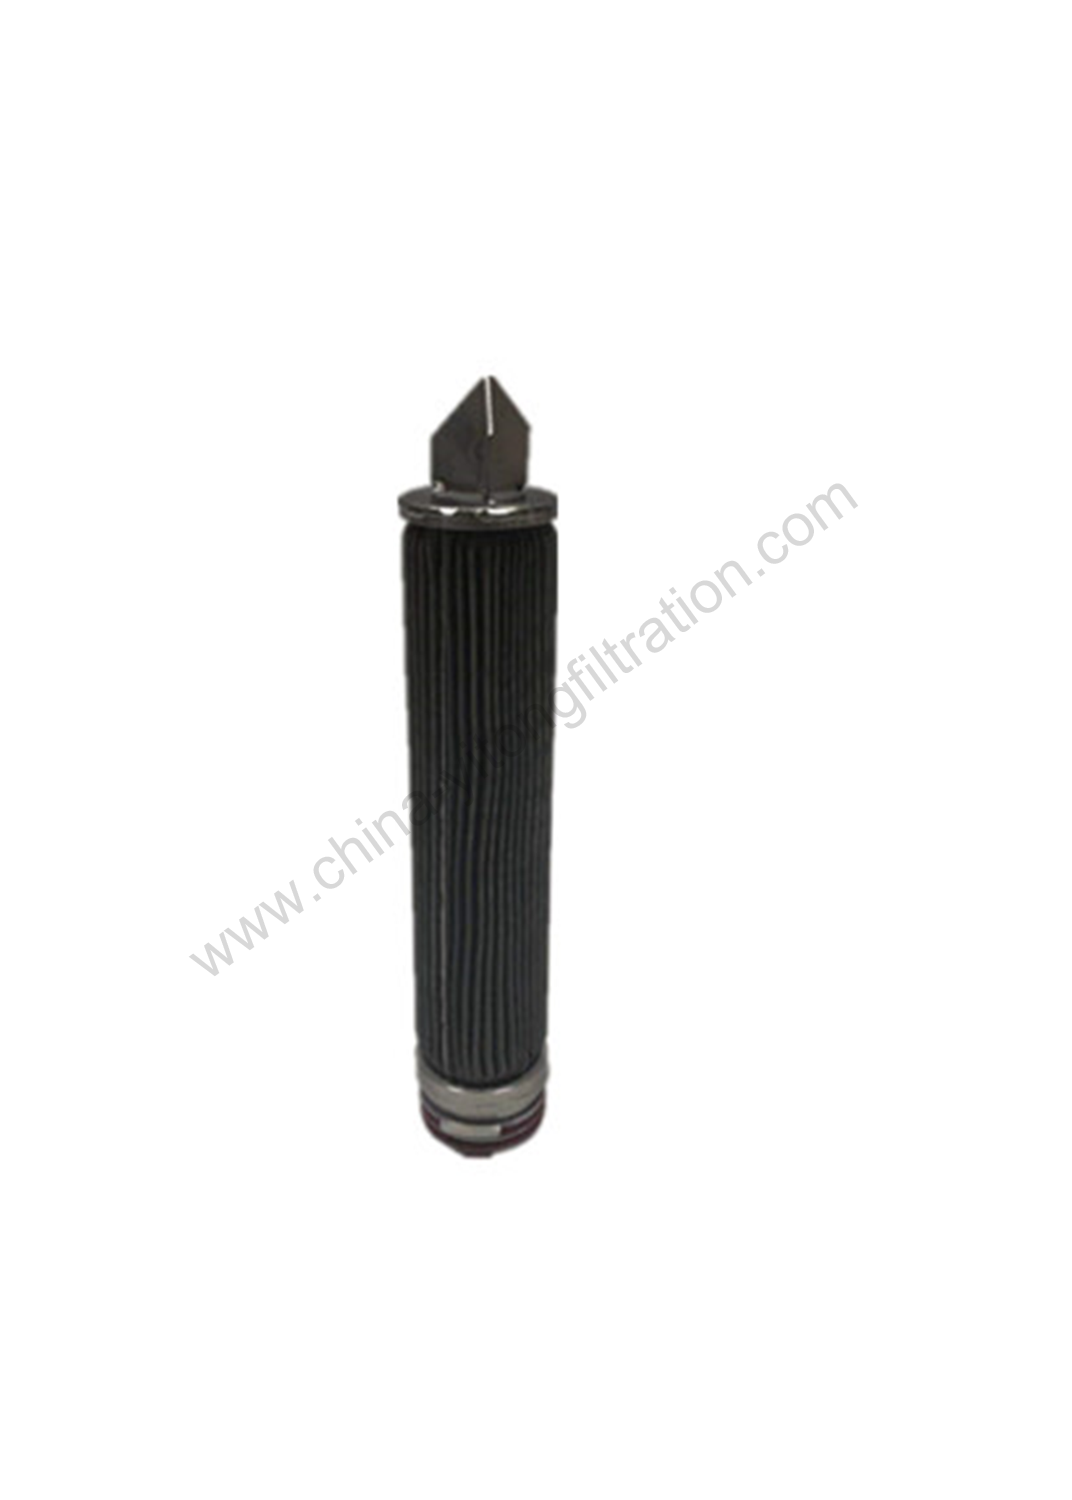 Stainless Steel Mesh Pleated Filter Cartridge